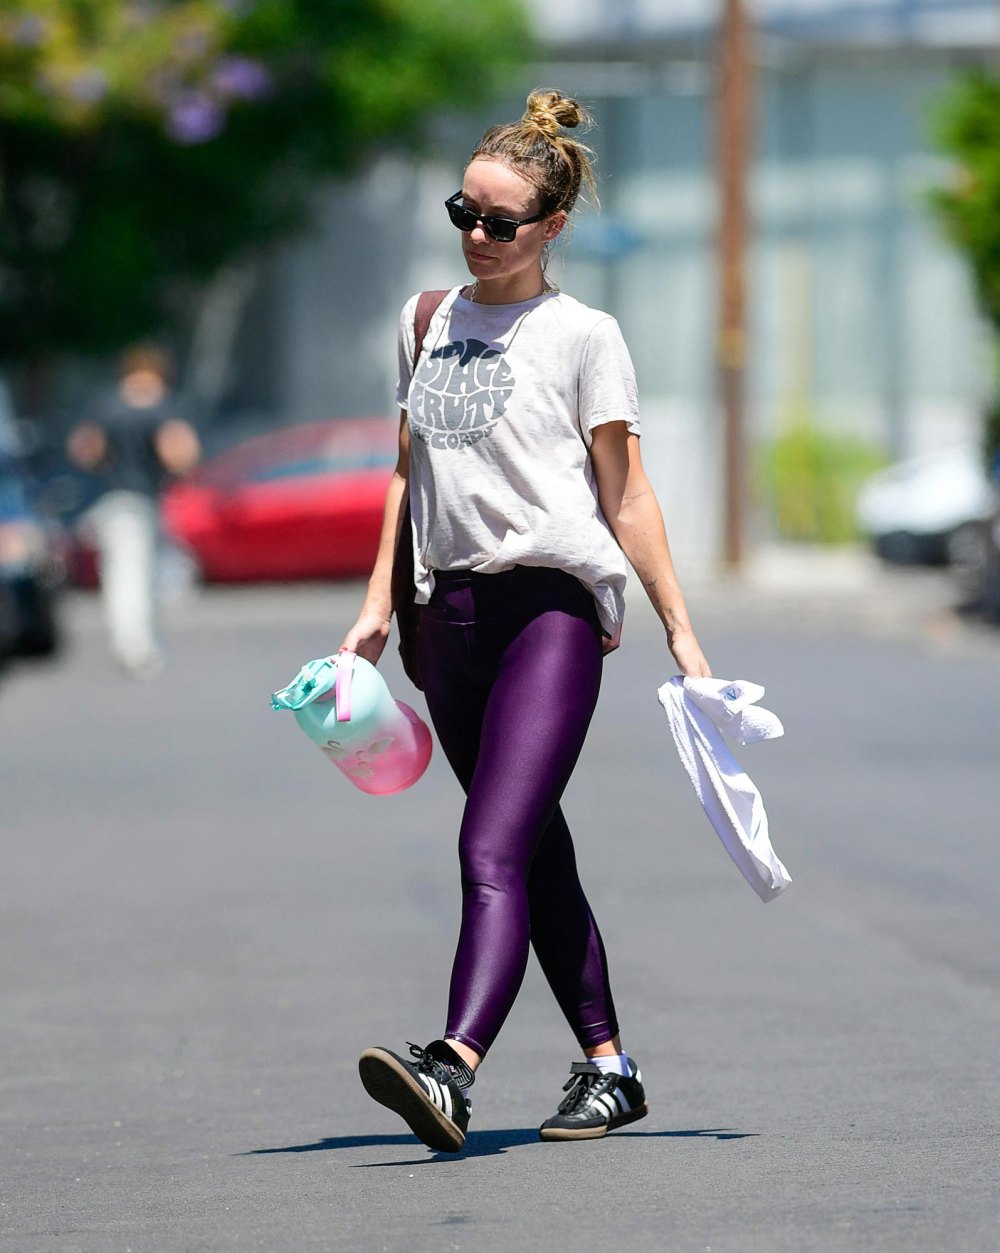 Olivia-Wilde-Raises-Eyebrows-While-Seemingly-Wearing-Harry-Styles--T-Shirt-7-Months-After-Their-Split-625